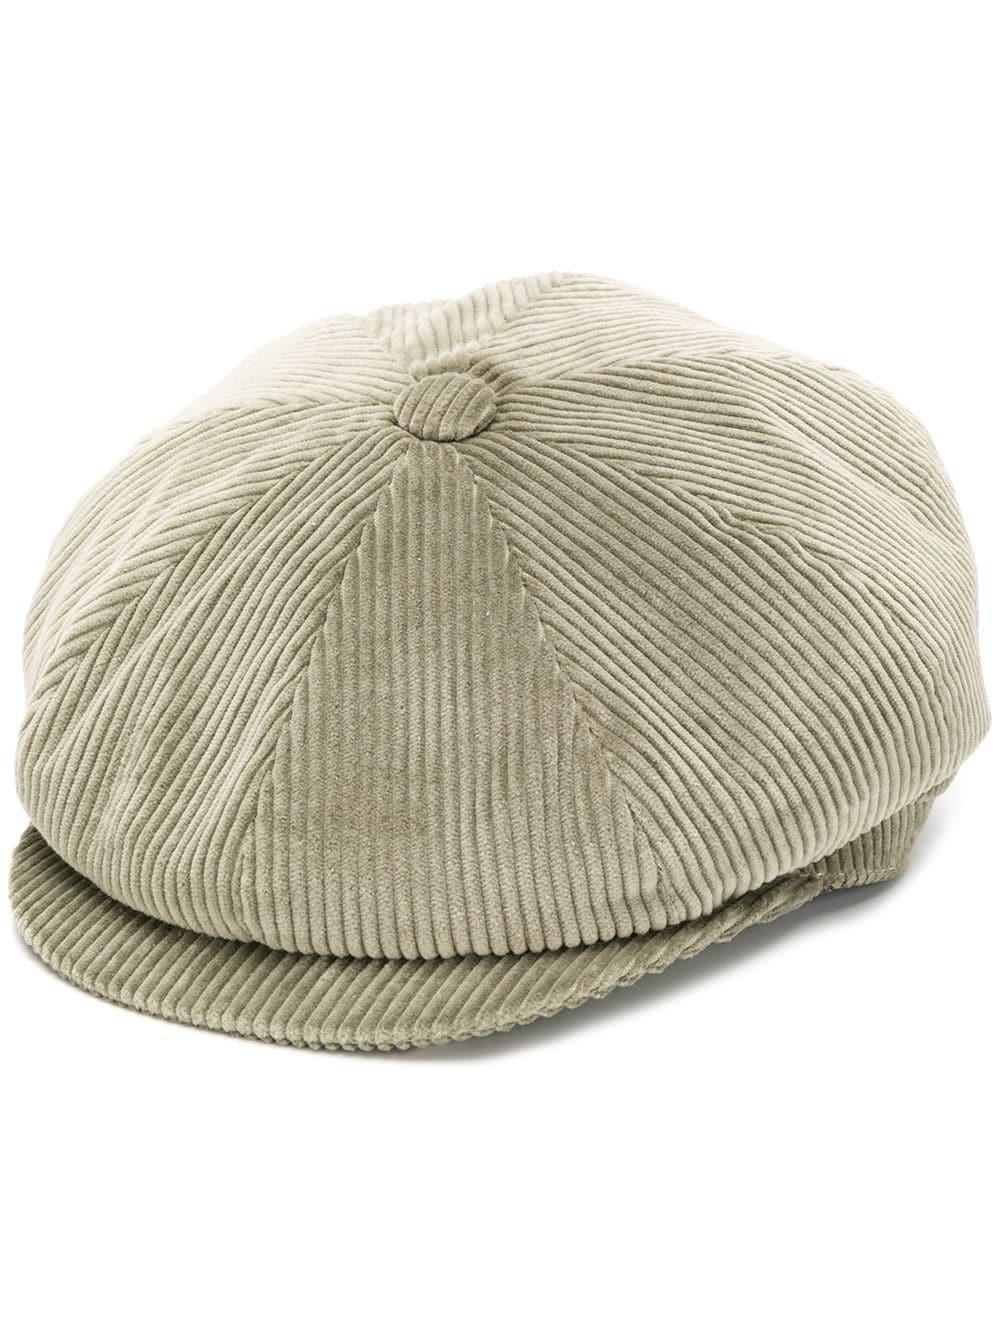 Brunello Cucinelli Ribbed Corduroy Beret in Green for Men - Lyst